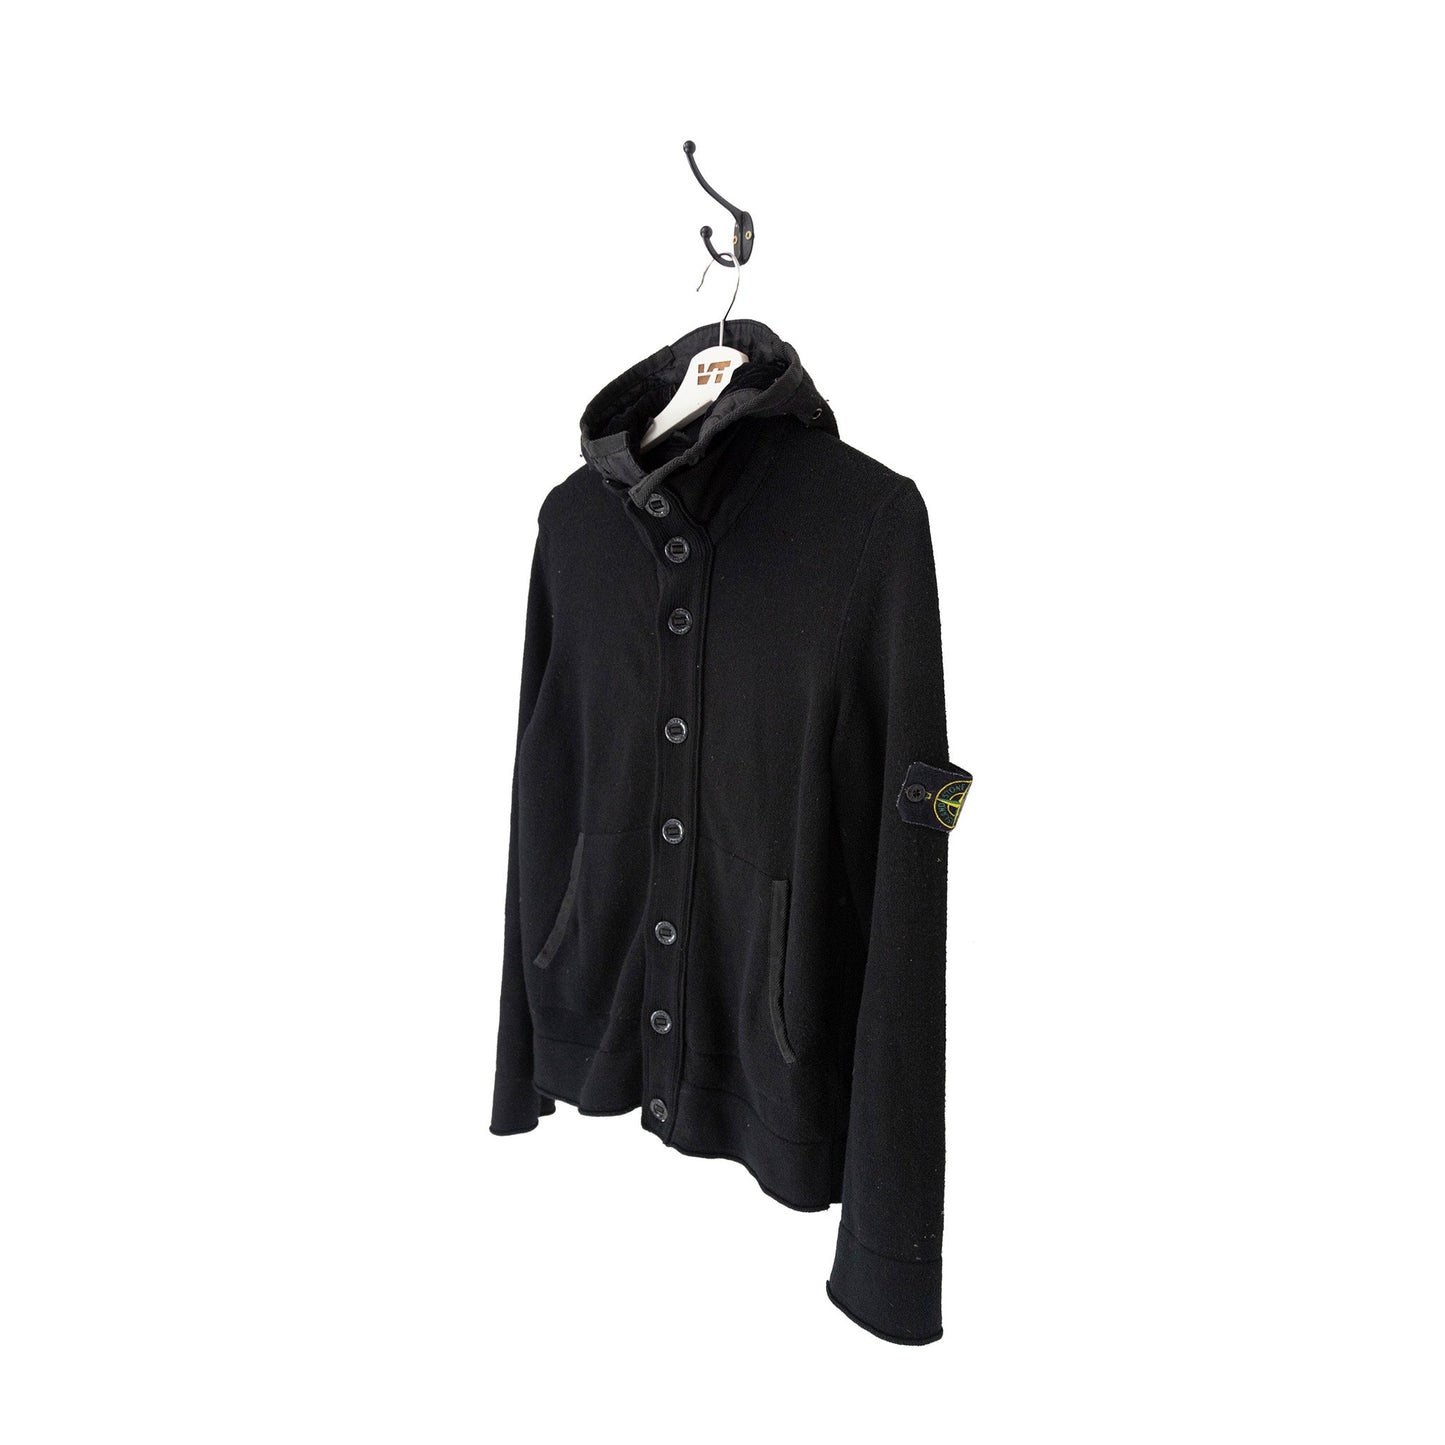 Stone Island A/W 2009 Black Hooded Button Knit Sweater